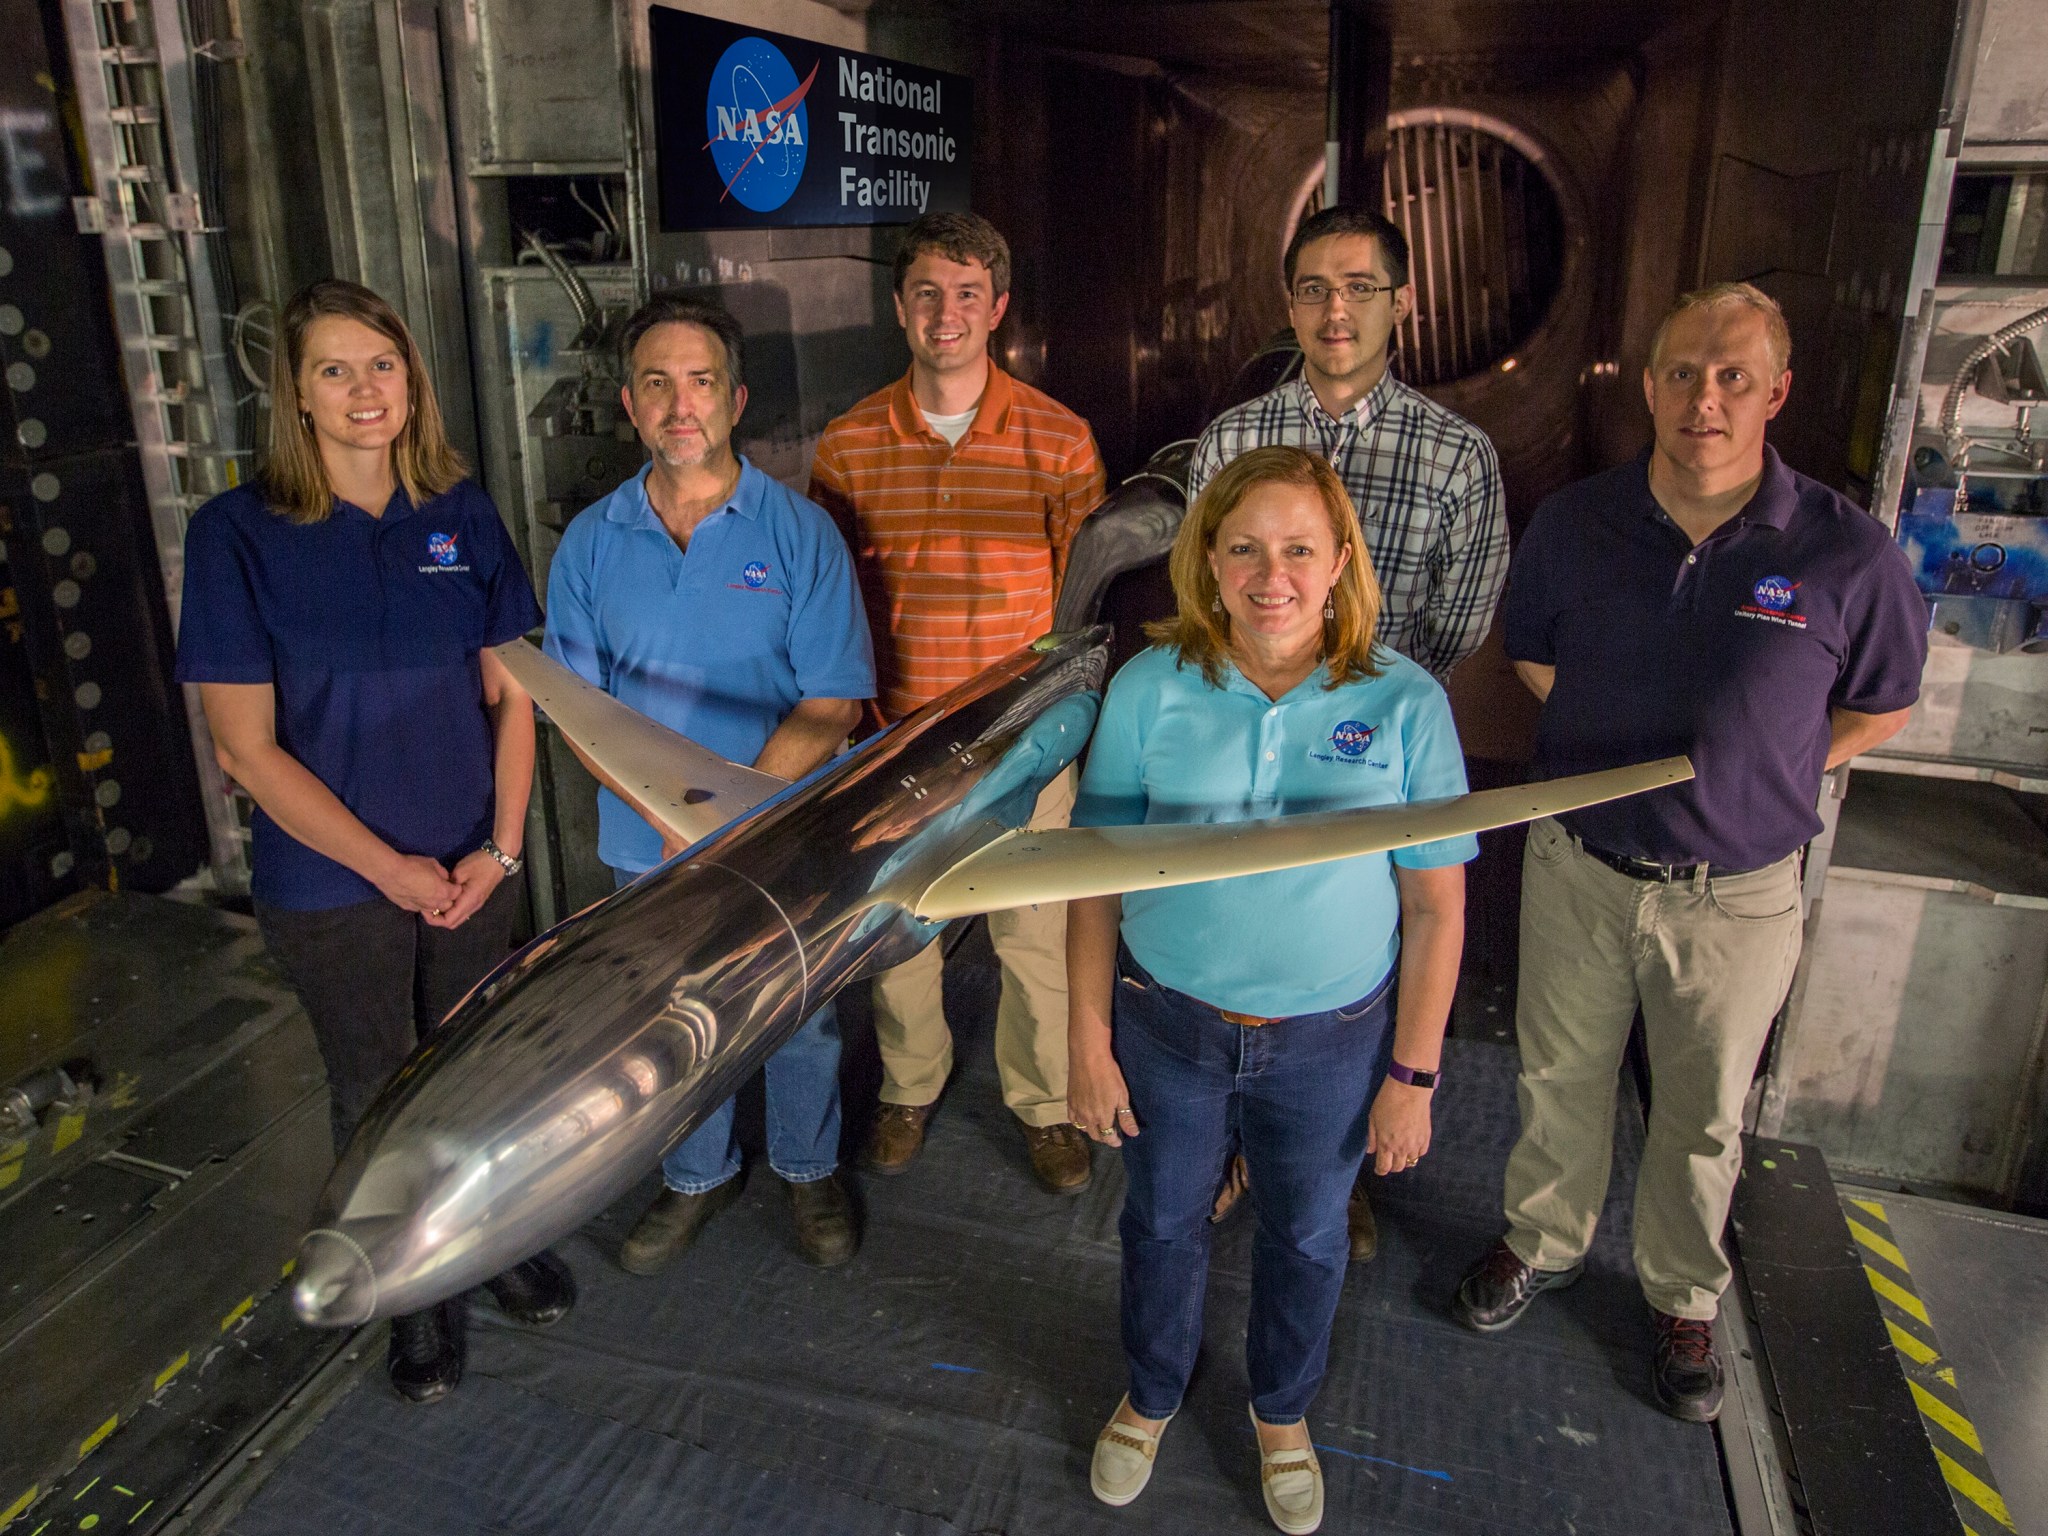 AIAA Innovation Award winner Melissa Rivers (front) with her team at NASA’s Langley Research Center.